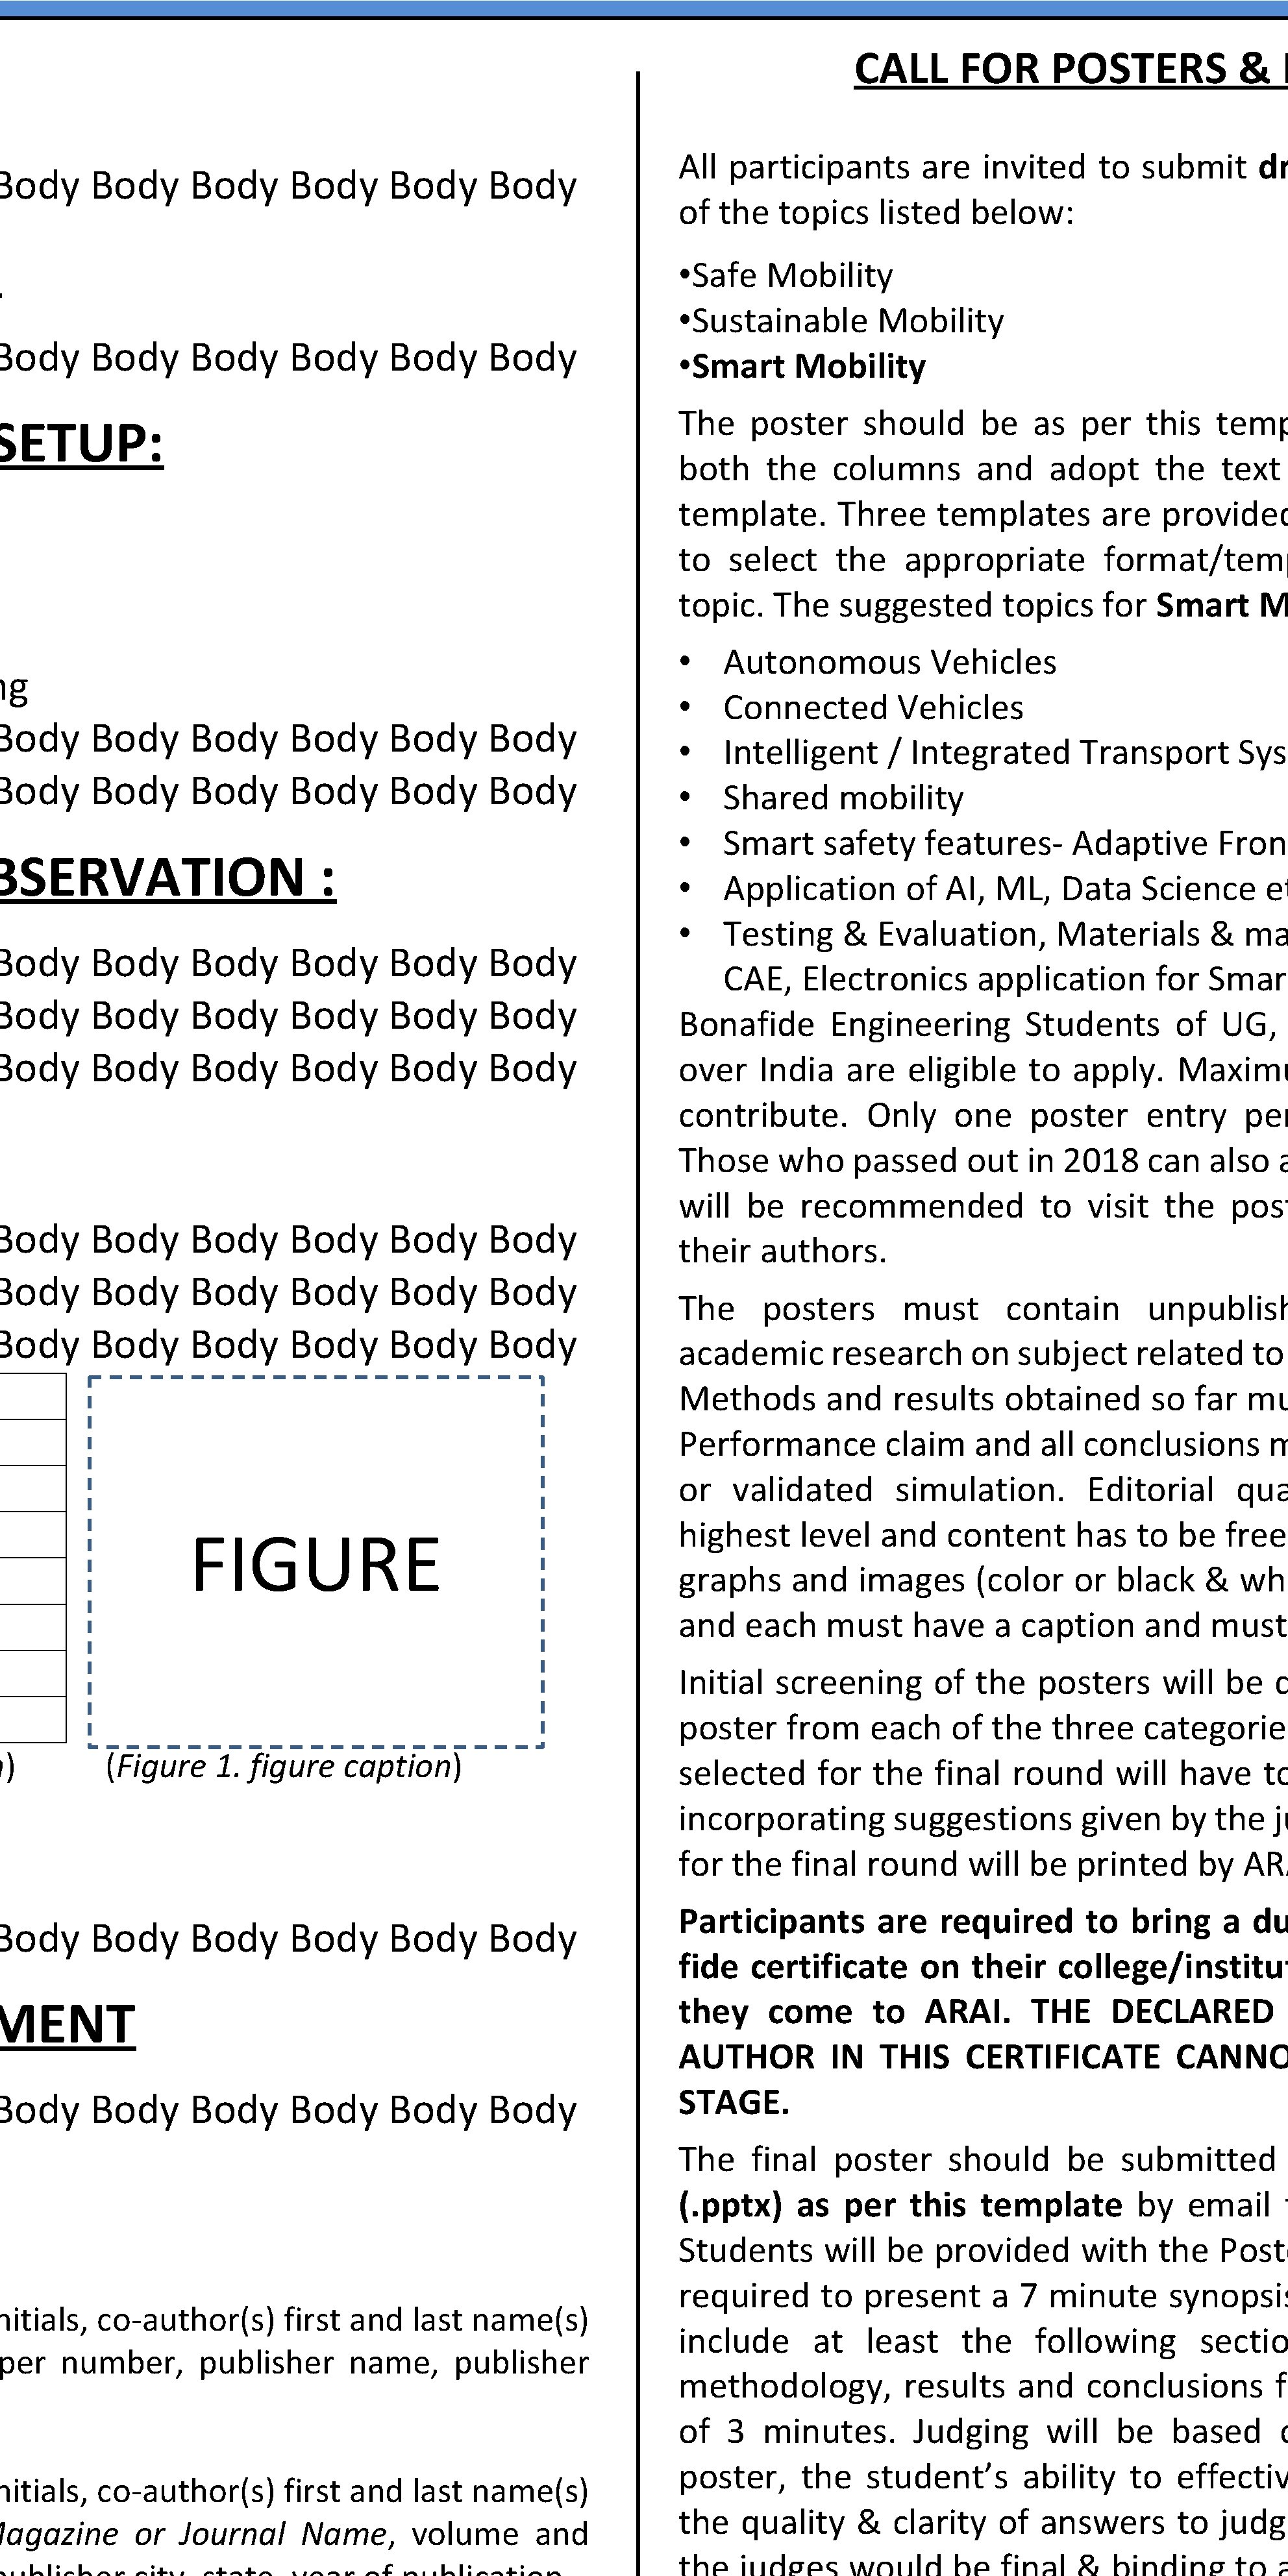 CALL FOR POSTERS & I Body Body : Body Body All participants are invited